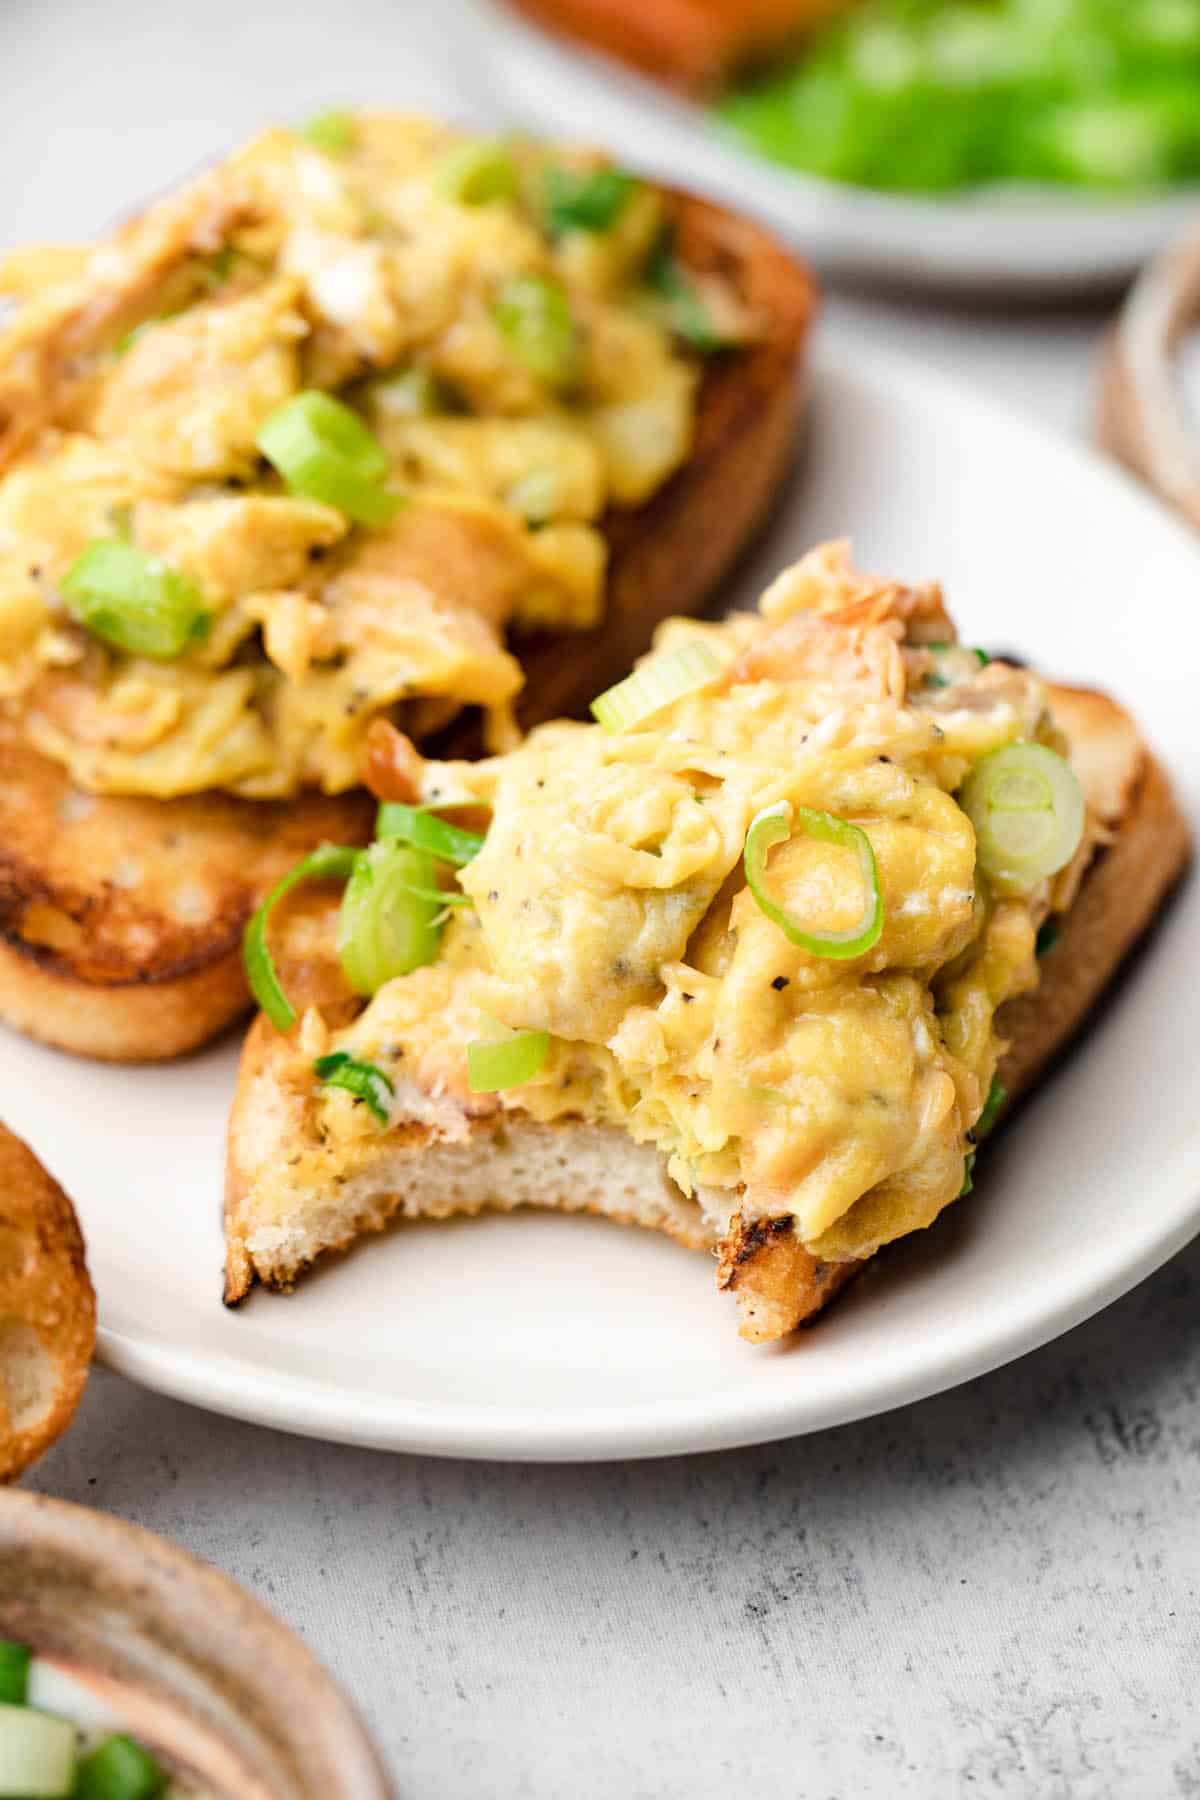 Scrambled eggs on a piece of toast with a bite taken out of it.